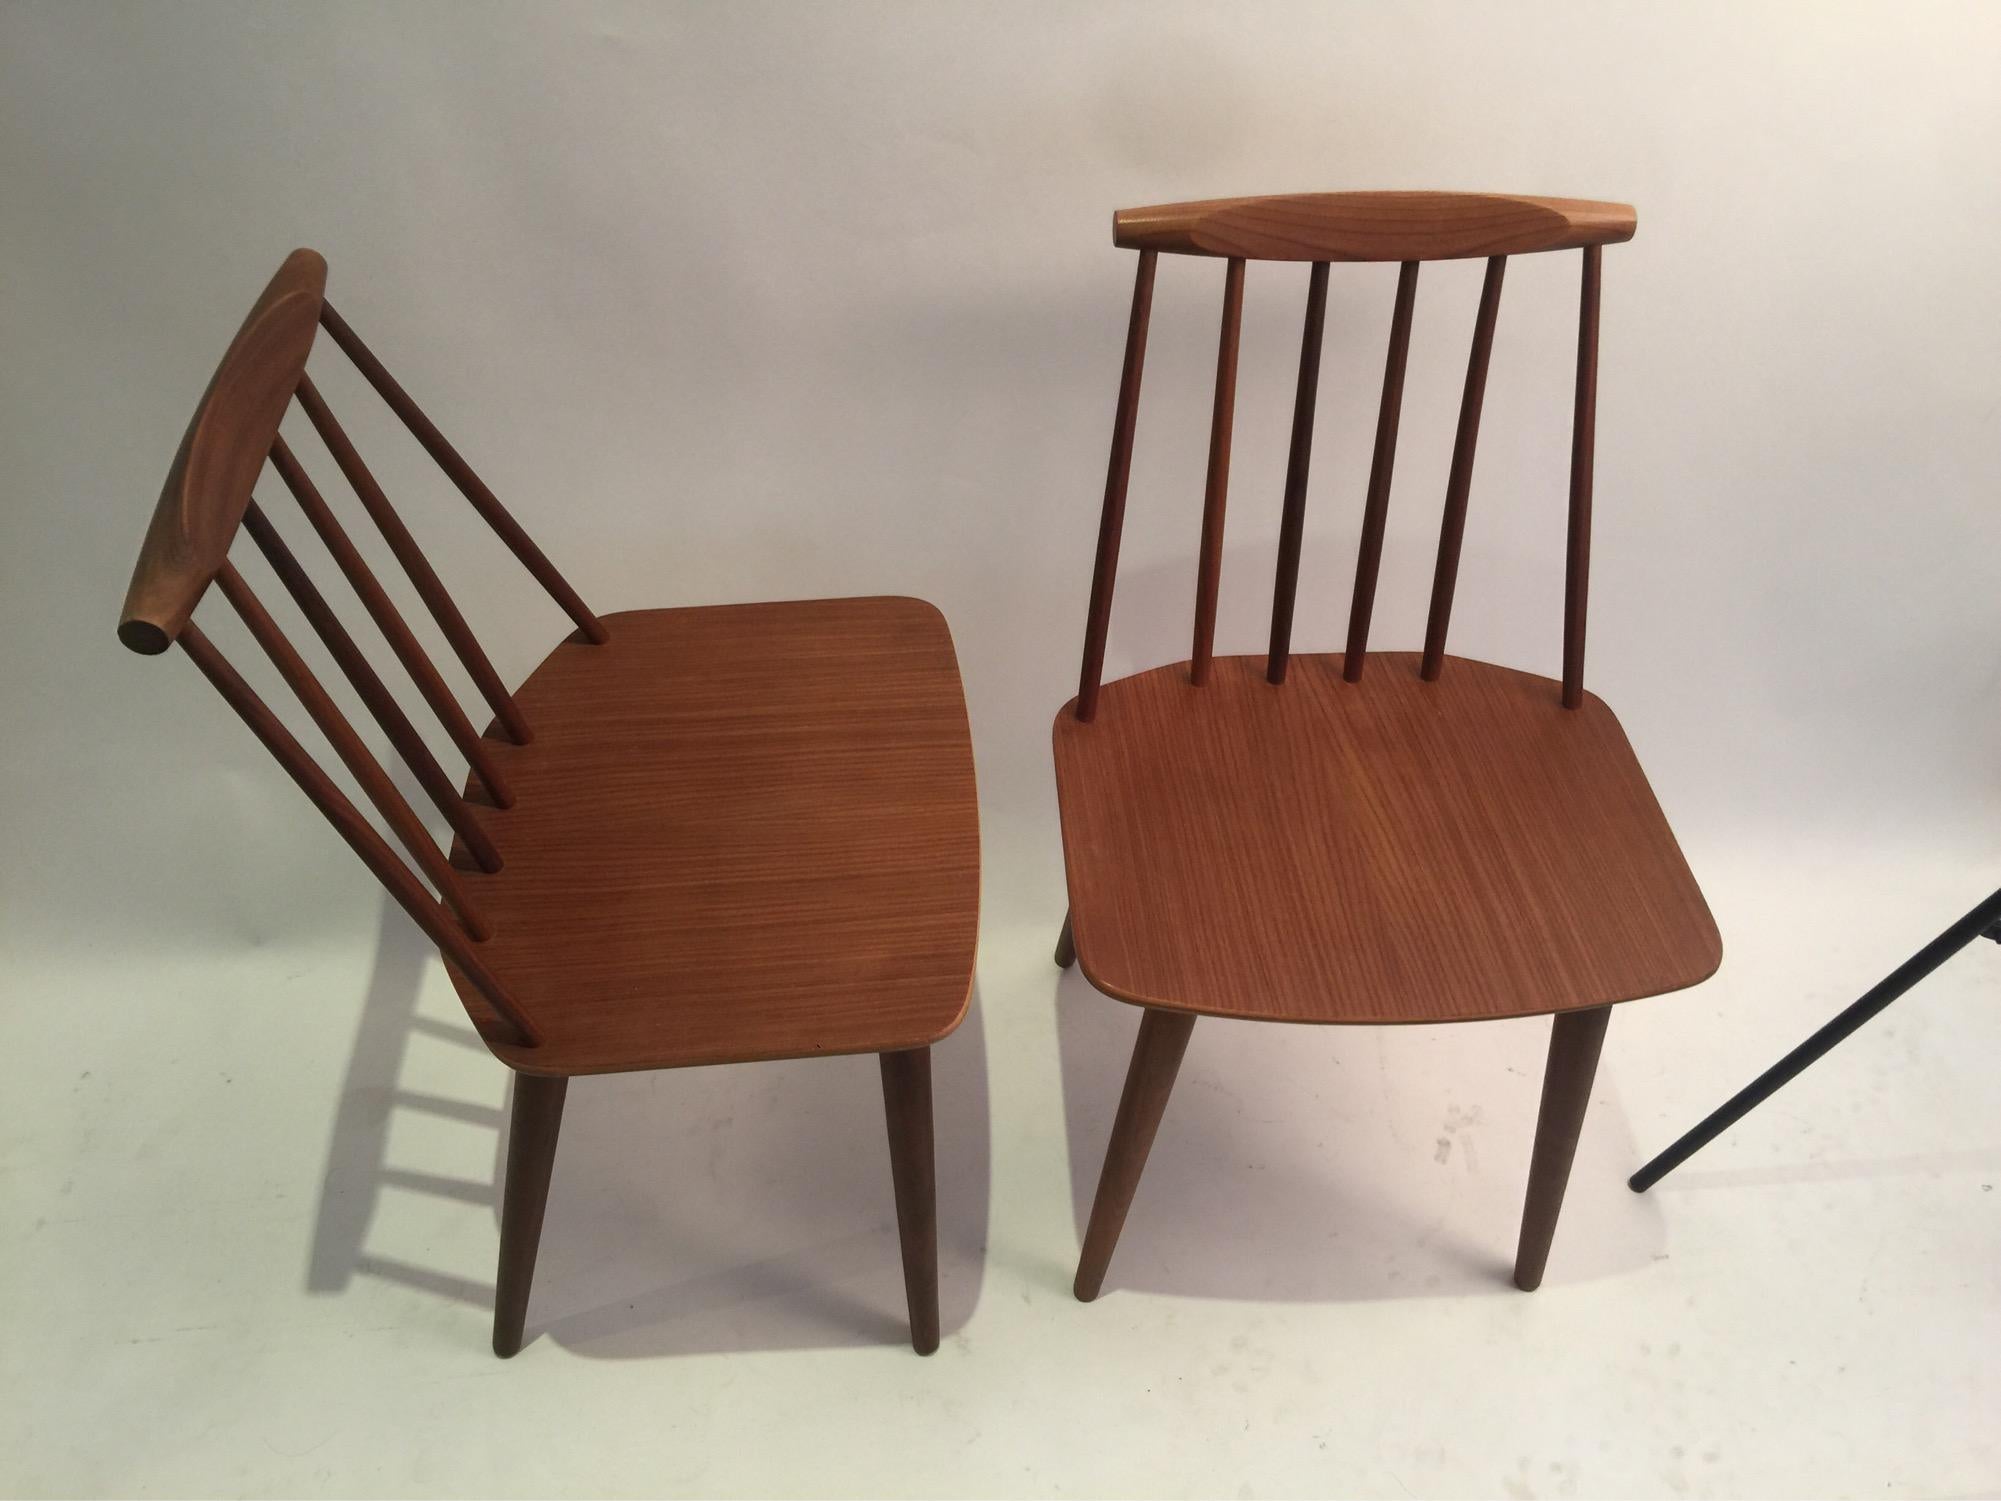 The Folke Palson for FDB Møbelfabrik J77 pair of chairs. Folke Pålsson based his design on the 1960s classic Windsor chair, which he functionally reduced in a typically Danish fashion.